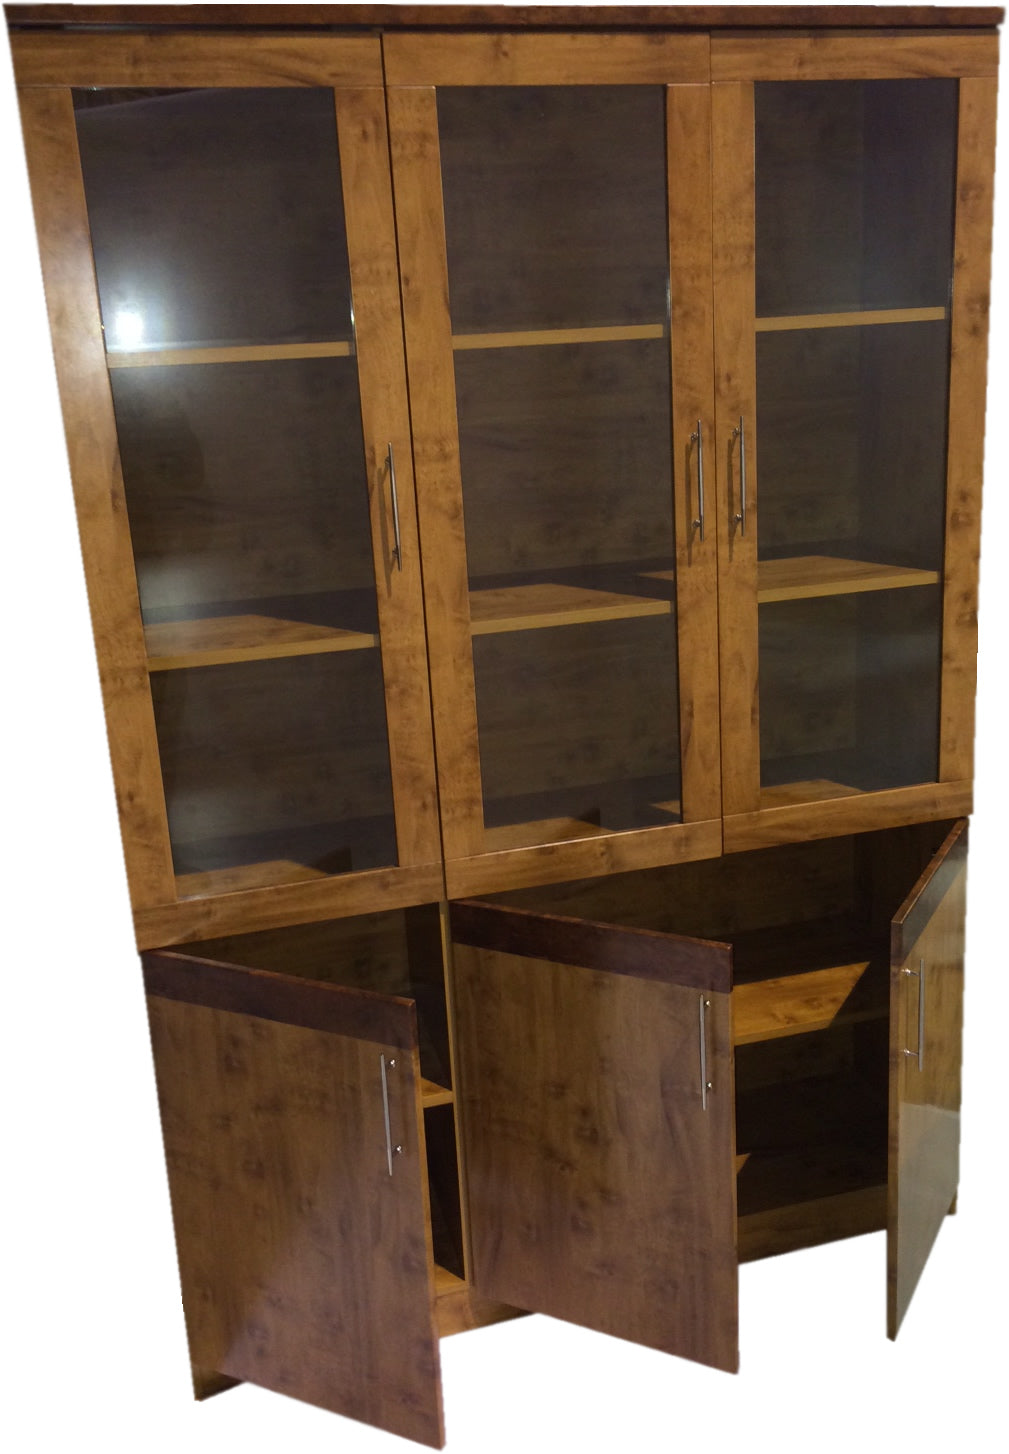 Yew Luxury Bookcase 3 Doors Wide DES-1862-192A-3DR